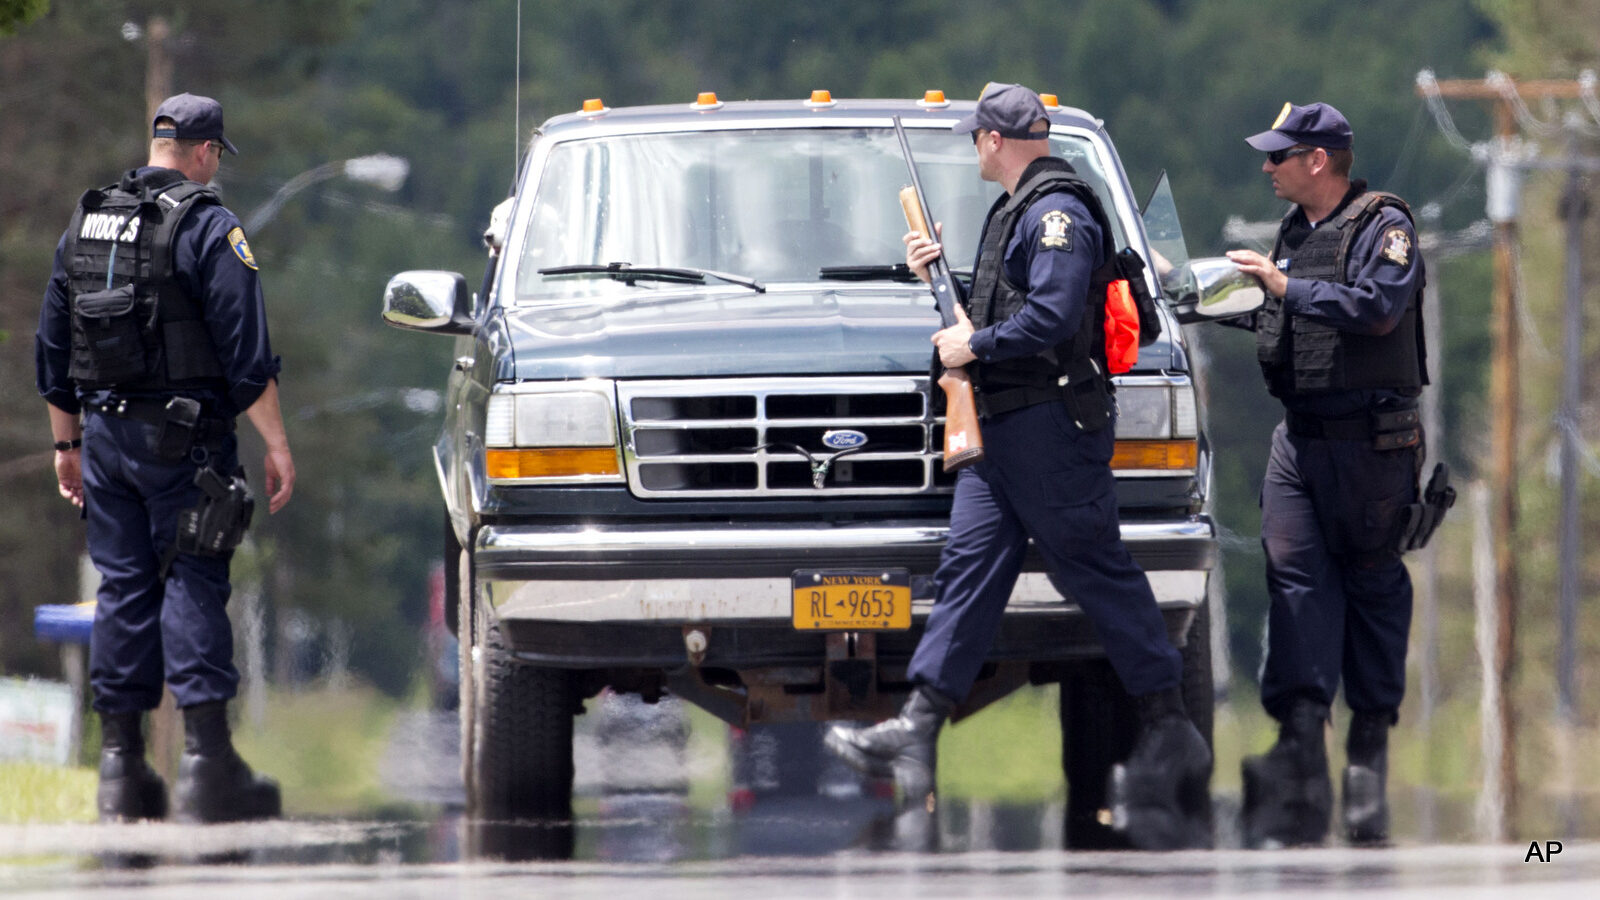 Corrections officers stop a vehicle as the search for two escaped prisoners from Clinton Correctional Facility